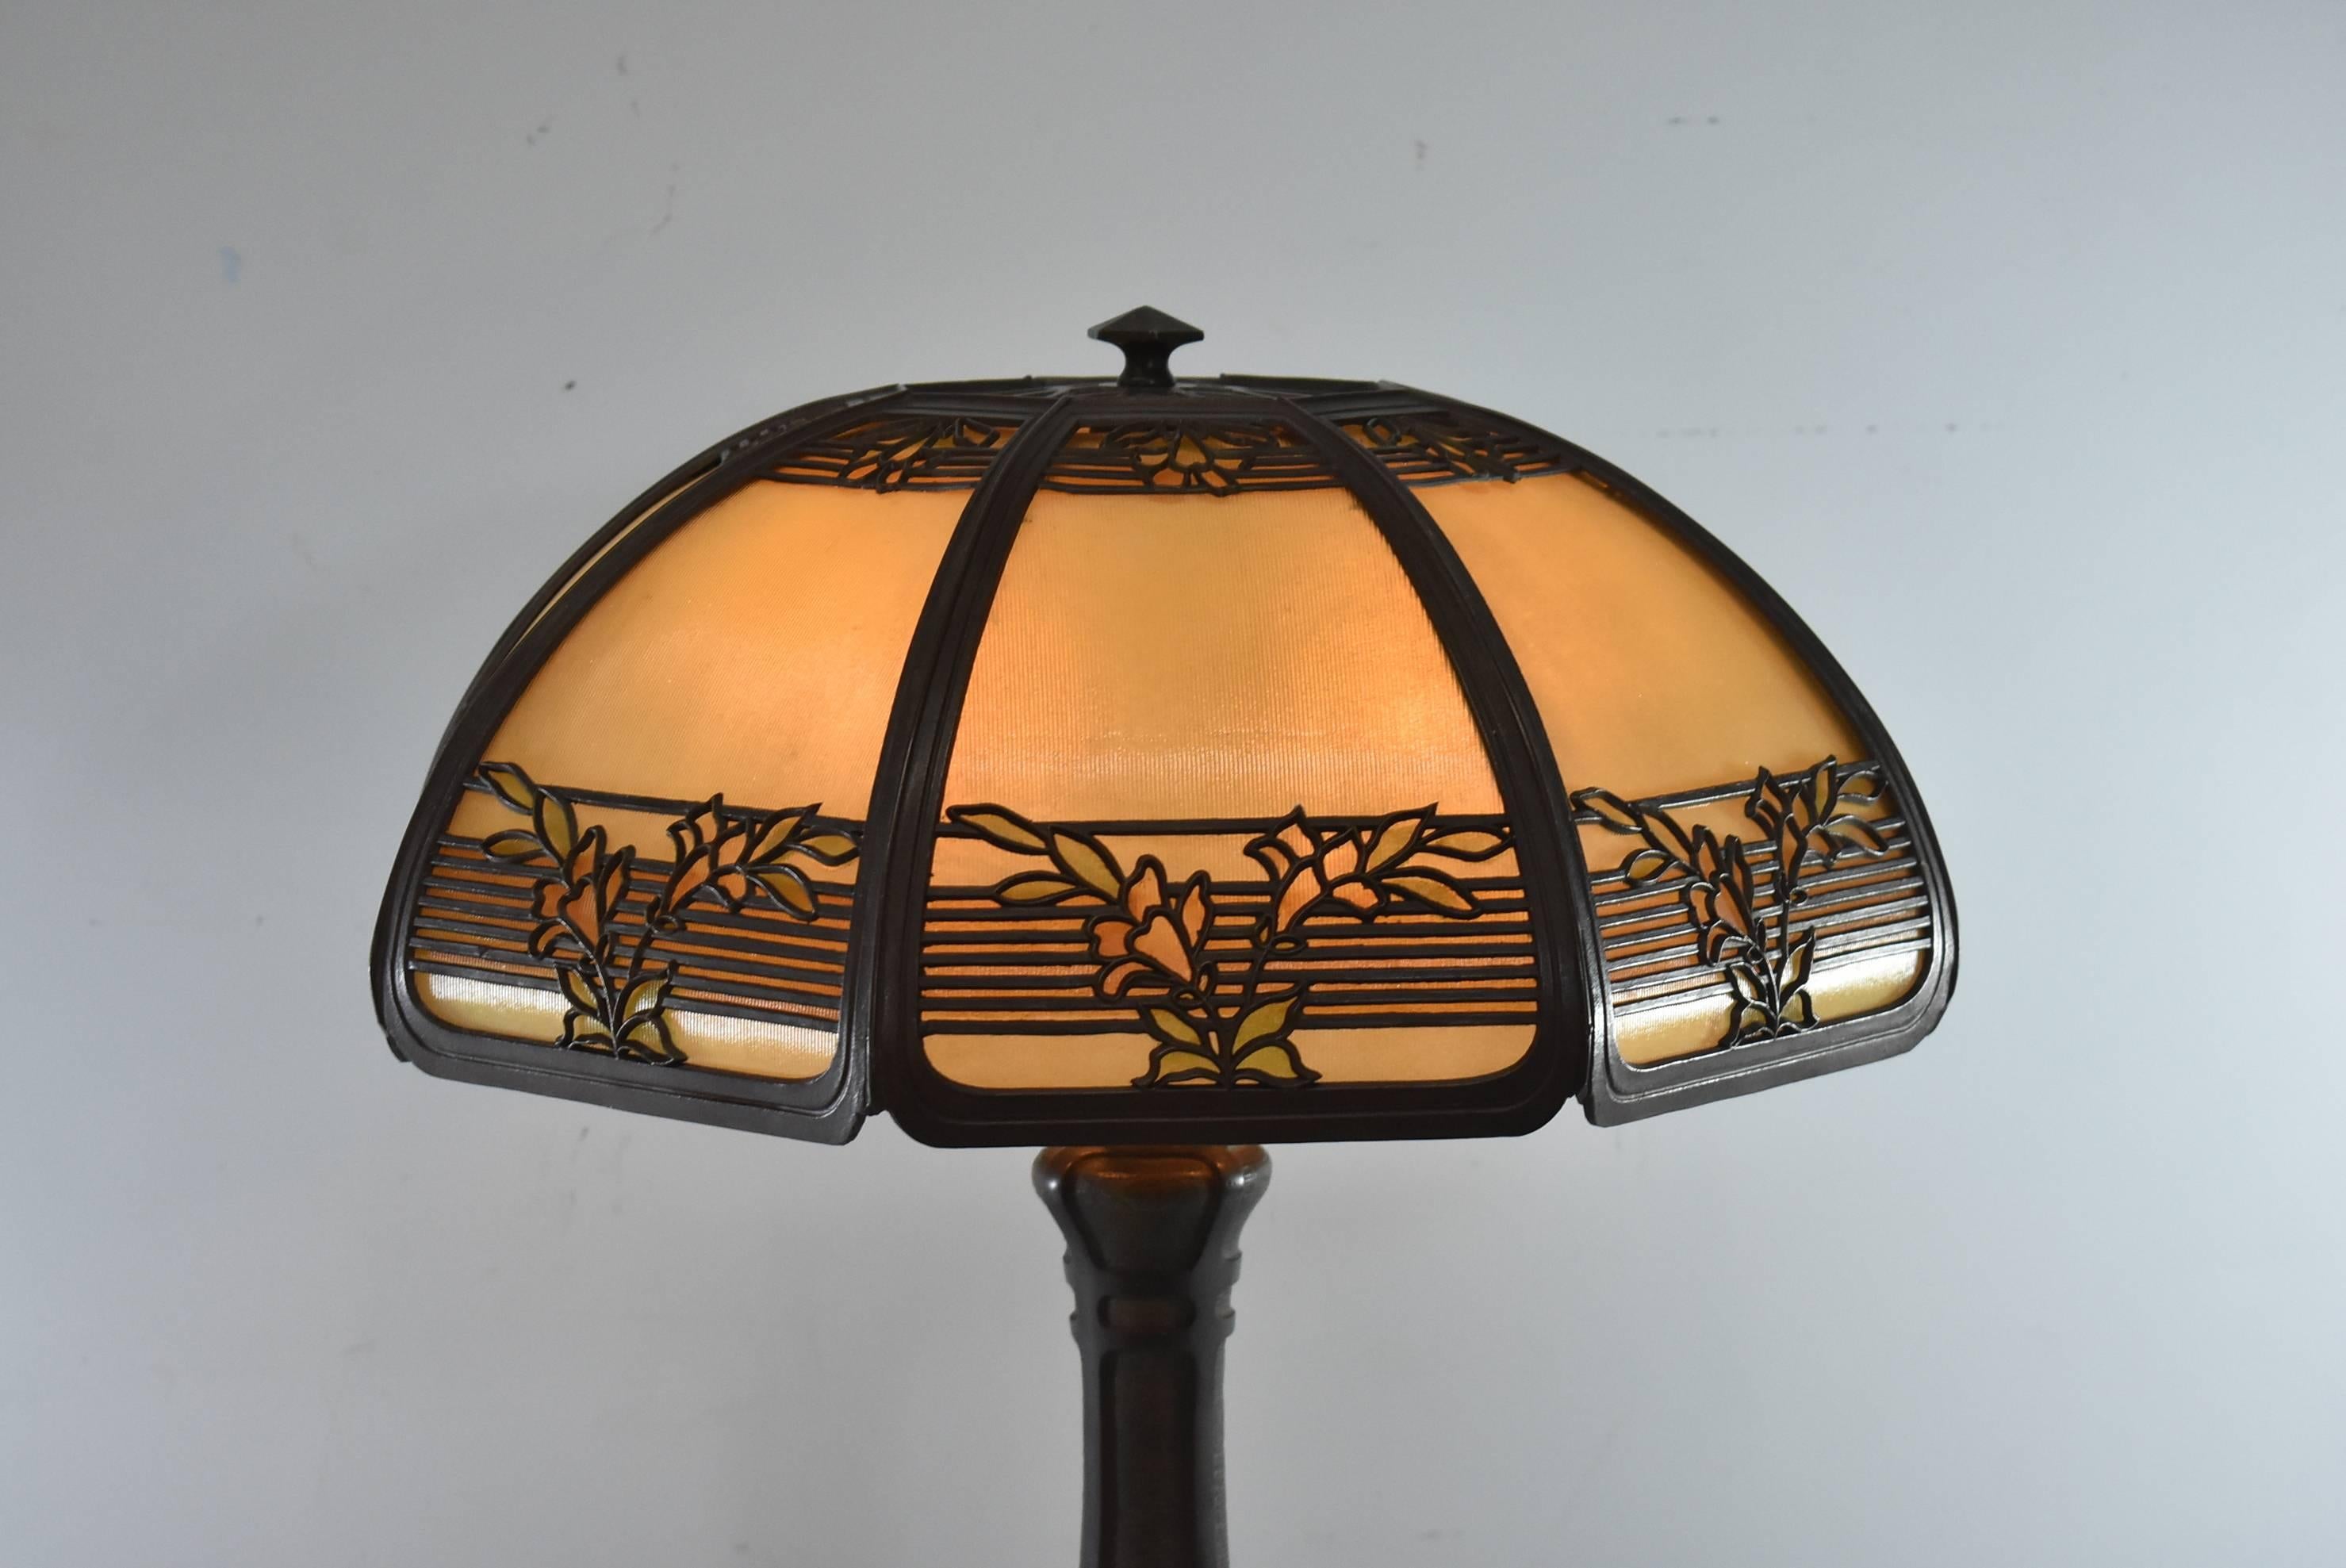 An exceptional bent panel reverse painted glass table lamp by Bradley and Hubbard. The beautiful shade features 8 ribbed panels internally decorated in muted shades of green with a band of light amber and is finished with a gorgeous floral overlay.